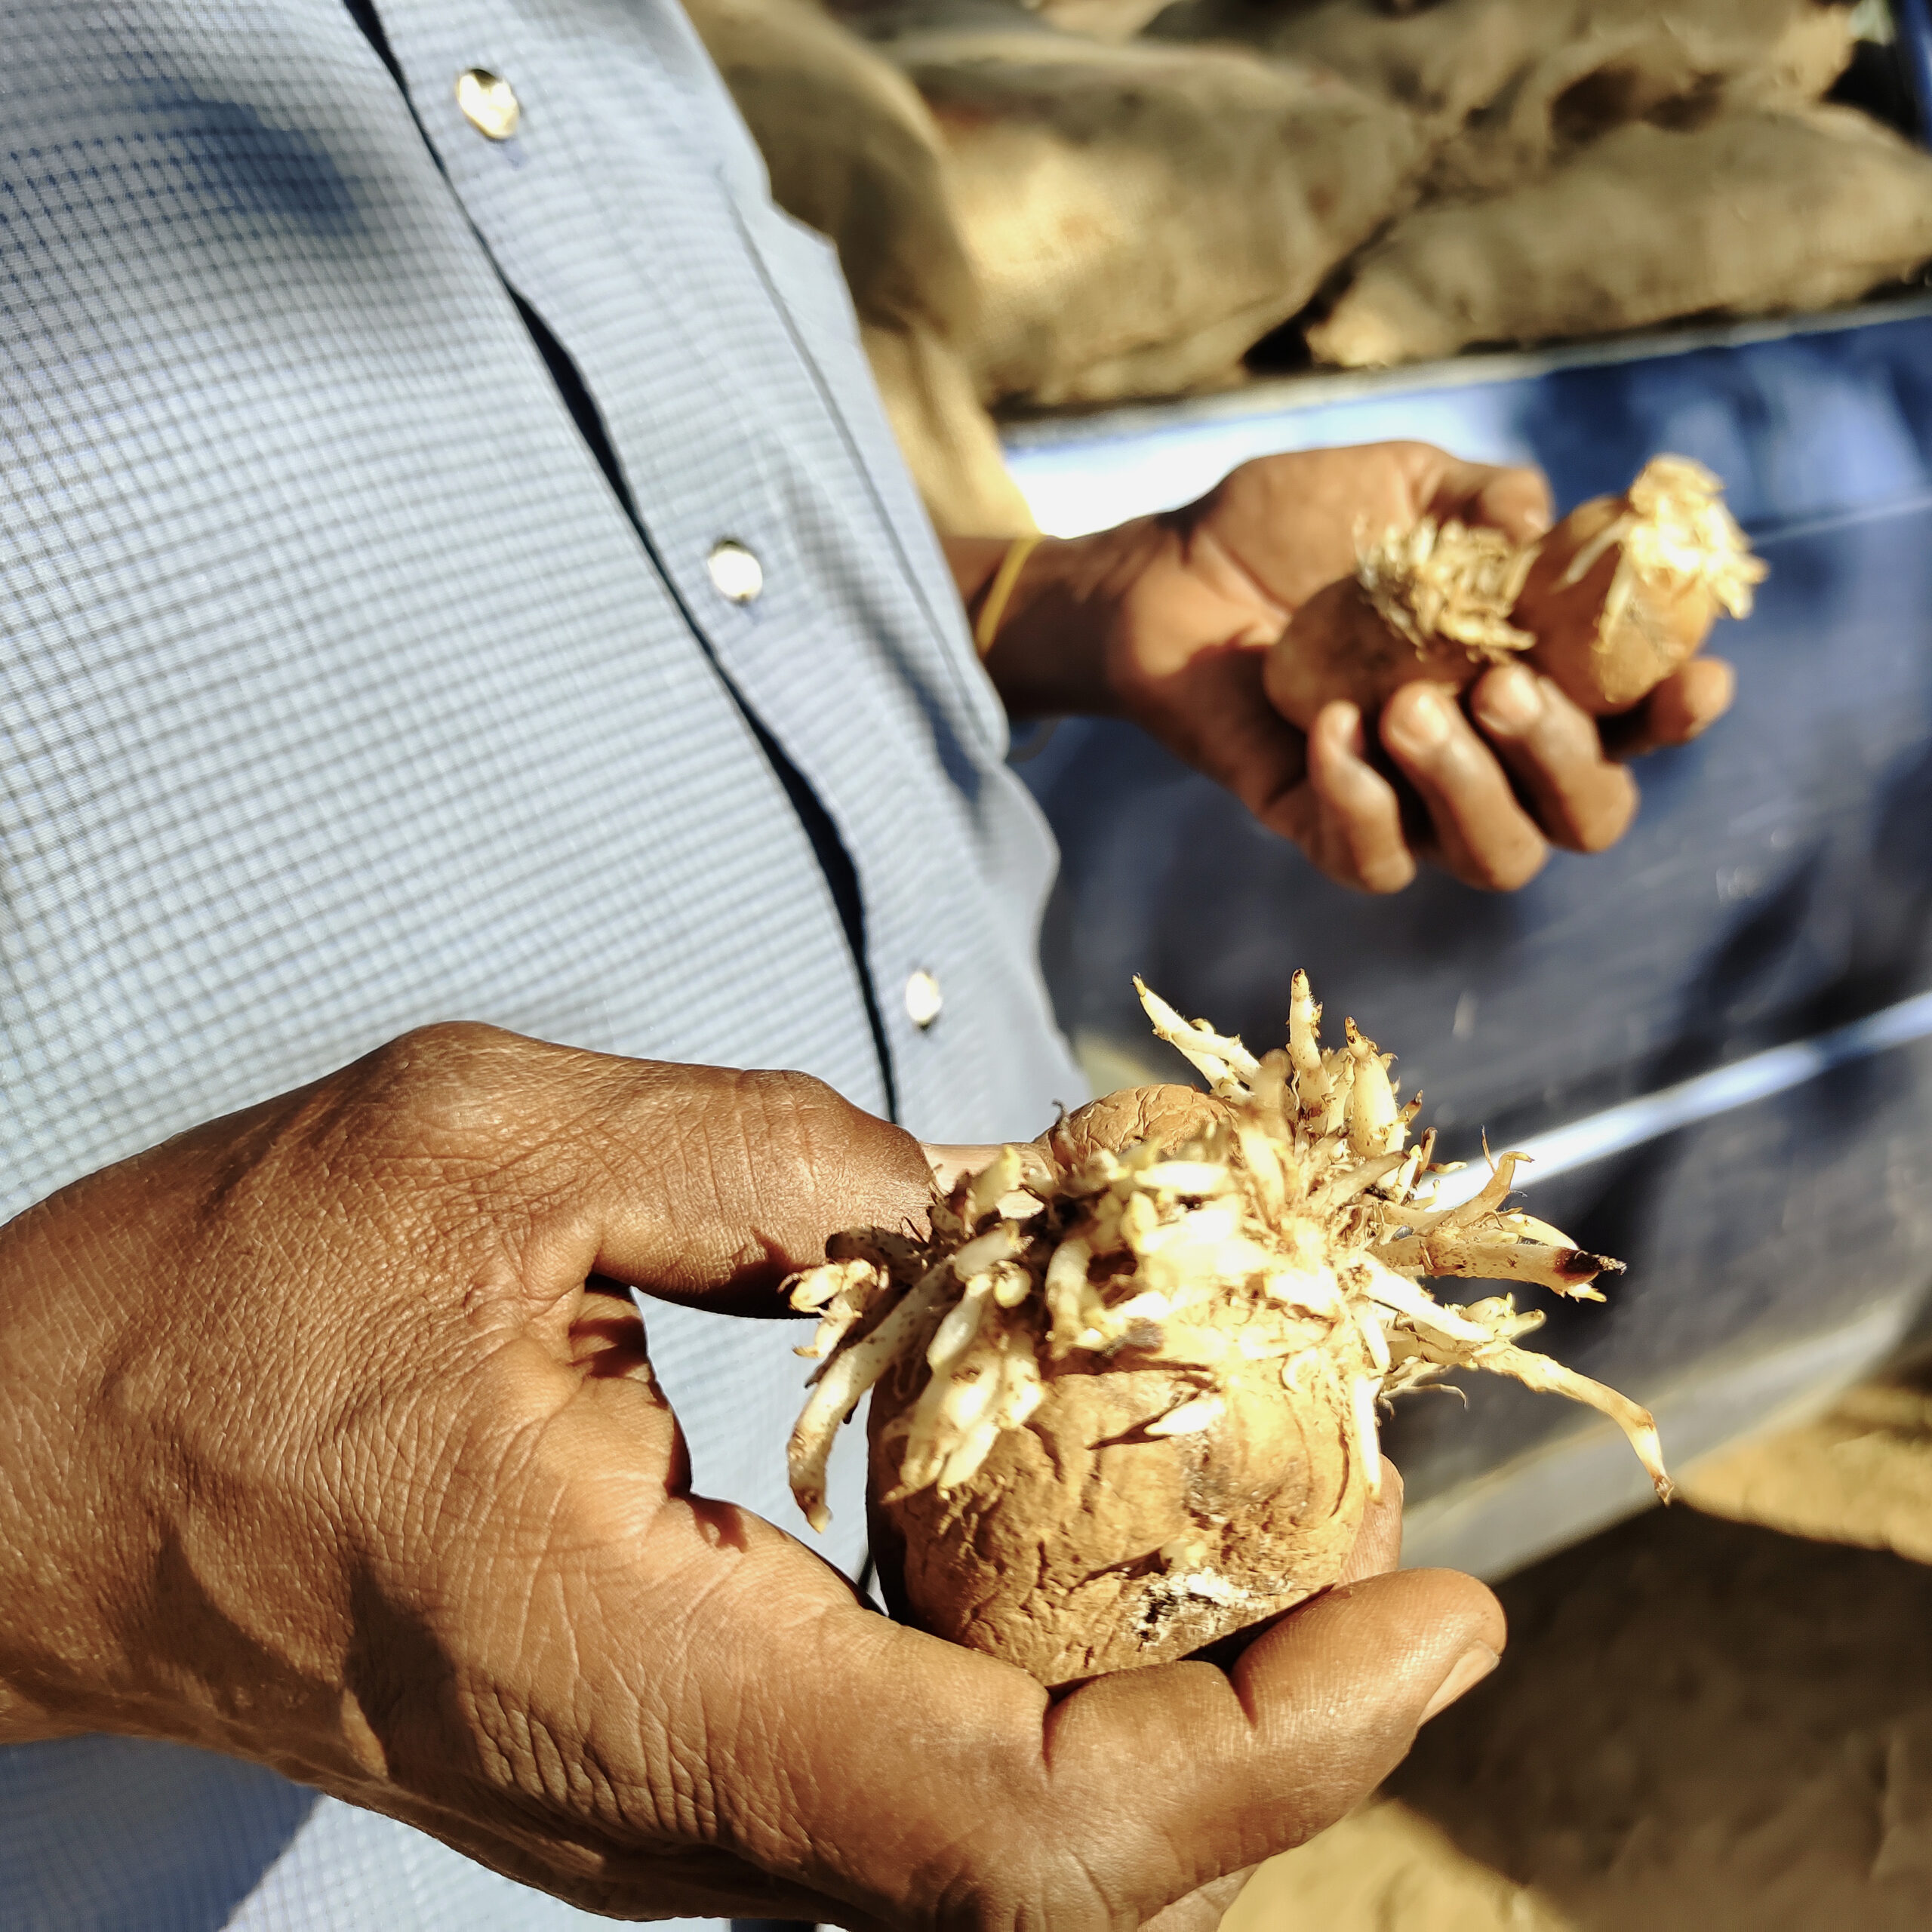 A person holding a sprouting potato in their hands, focusing on the growth emerging from the top.